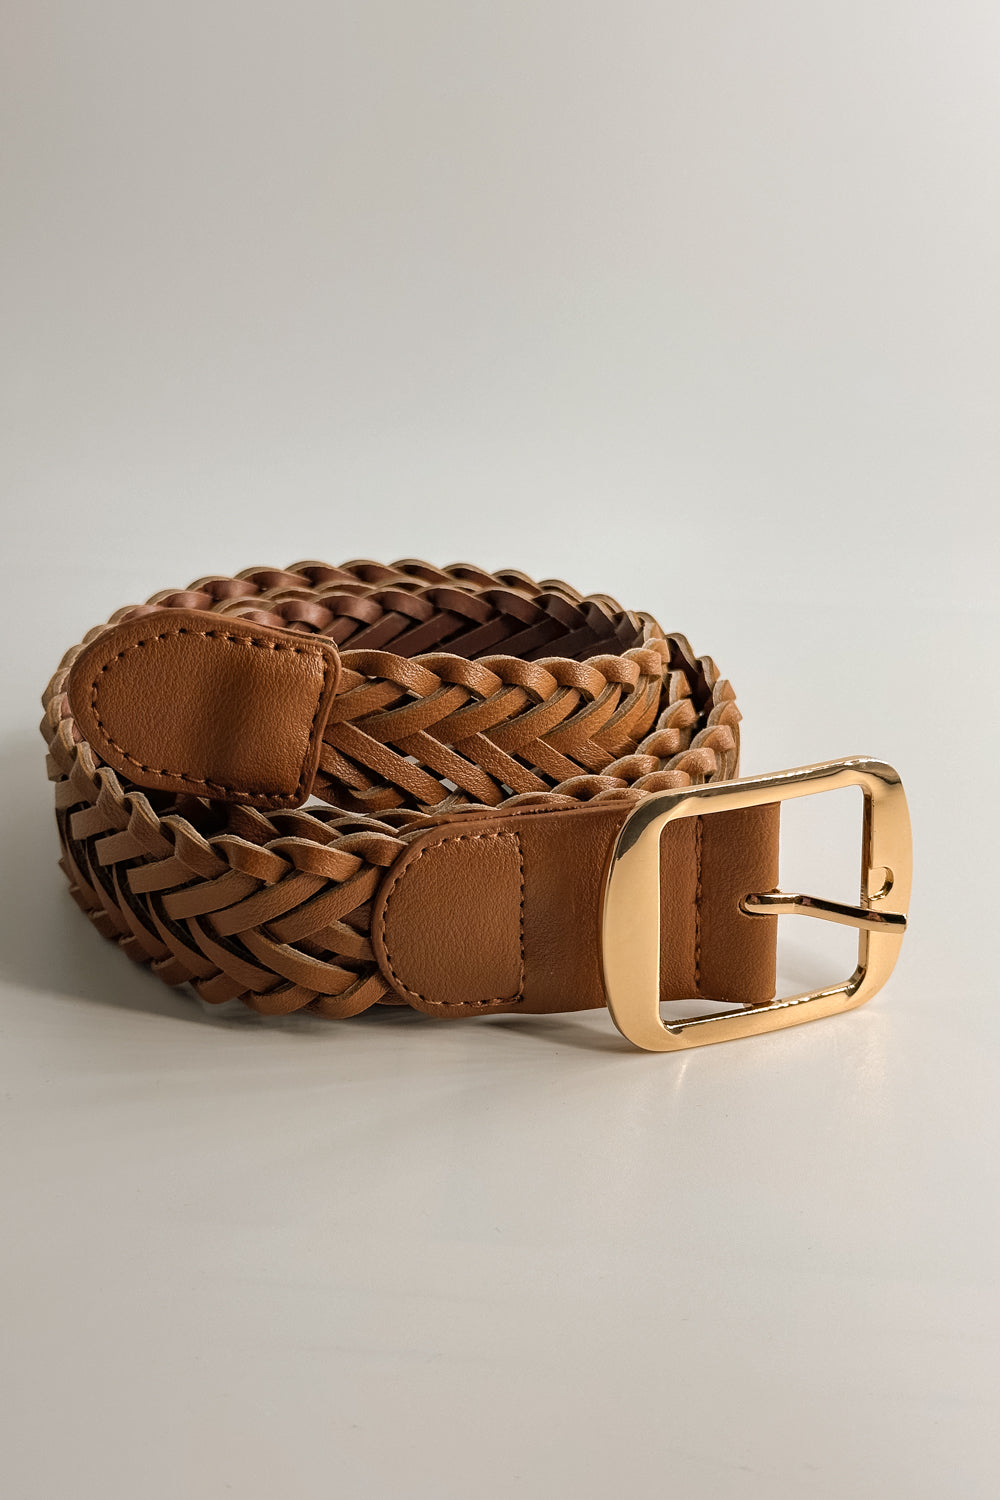 Front view of the Everly Braided Adjustable Belt in Brown  which features brown Leather Fabric, Braided Details, Gold Adjustable Buckle